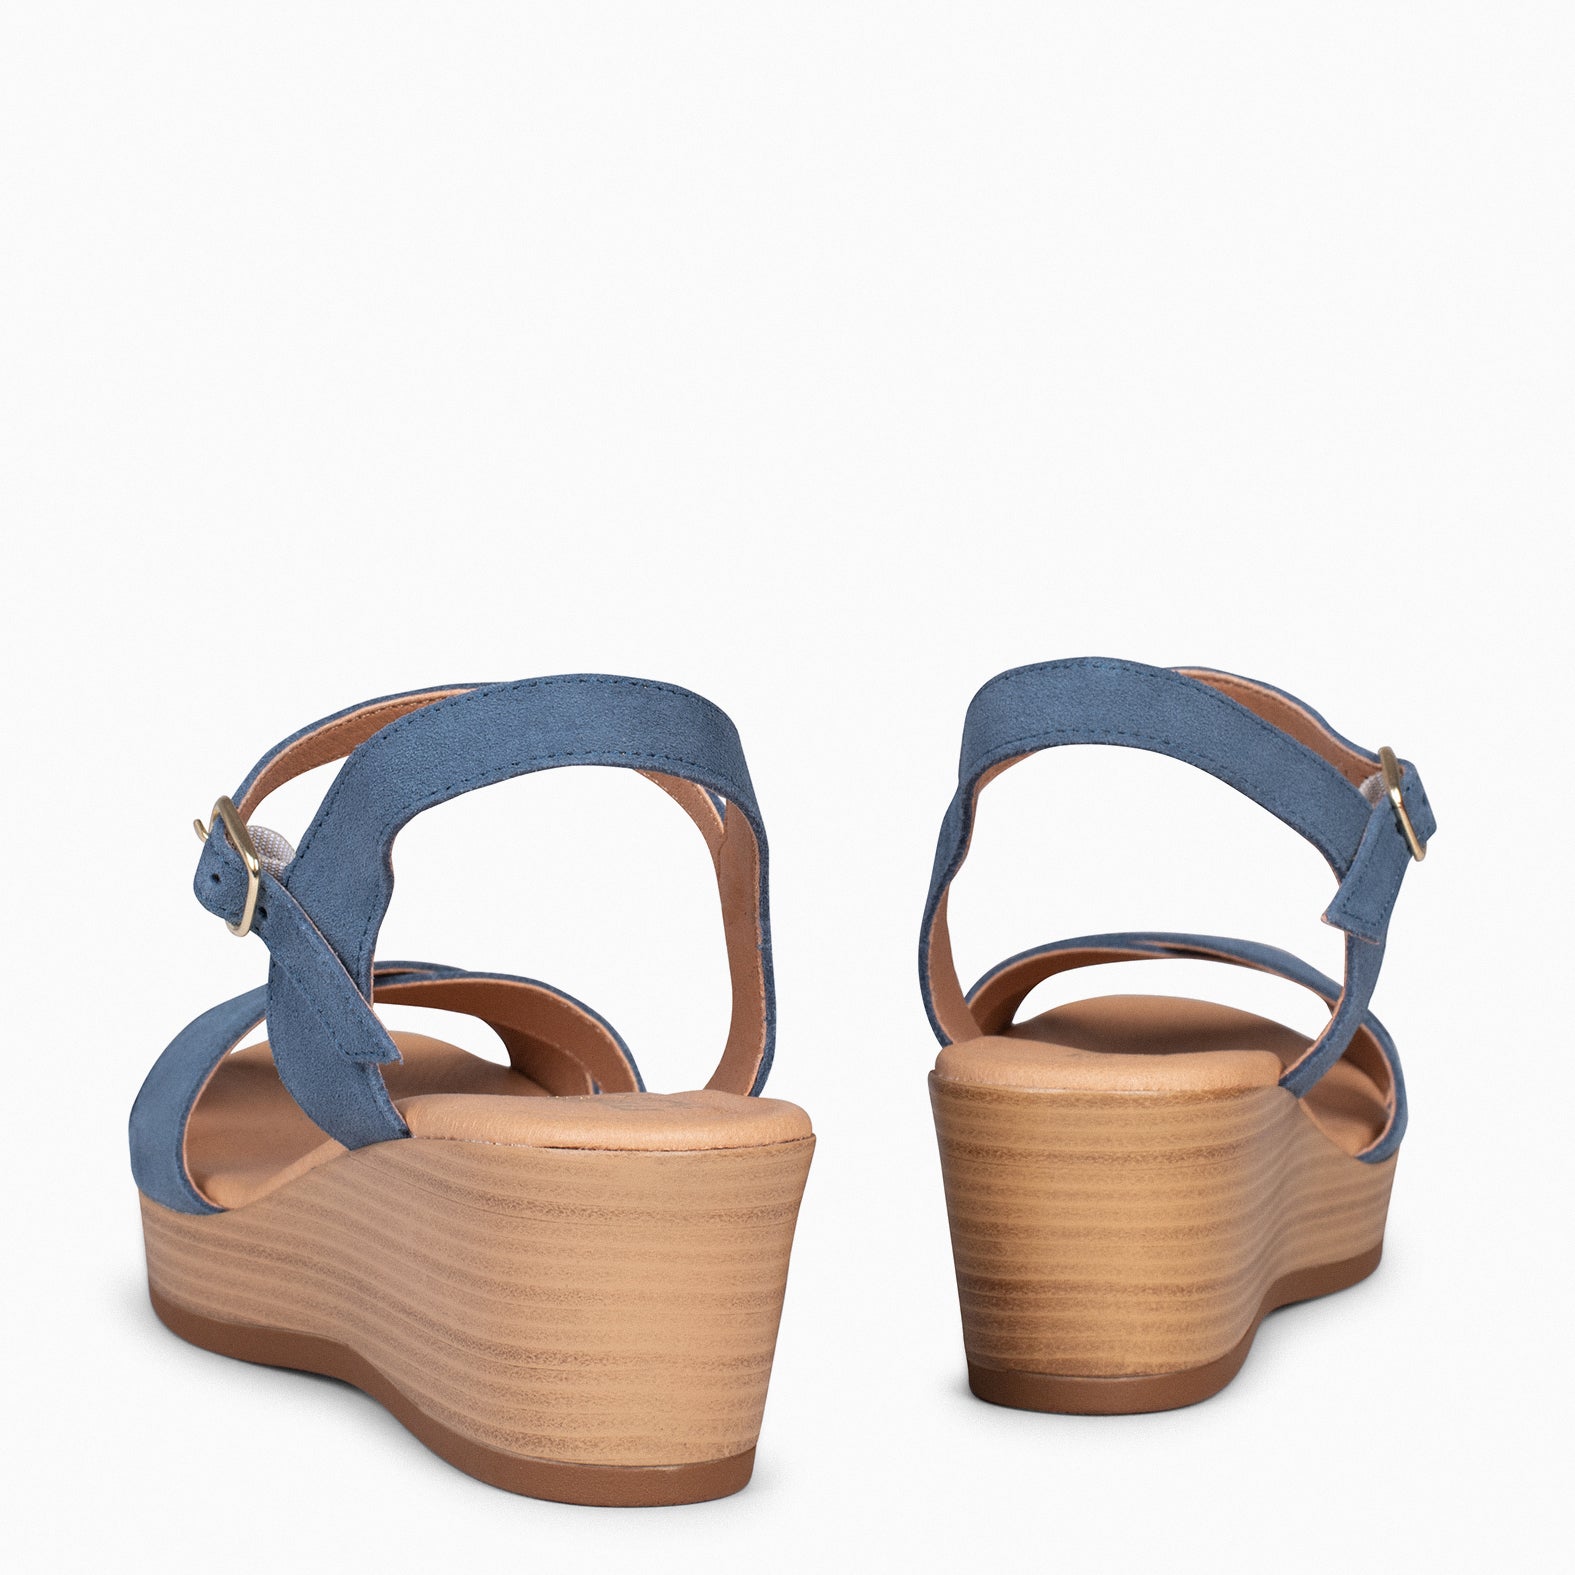 MAR – BLUE JEANS WEDGE SHOES